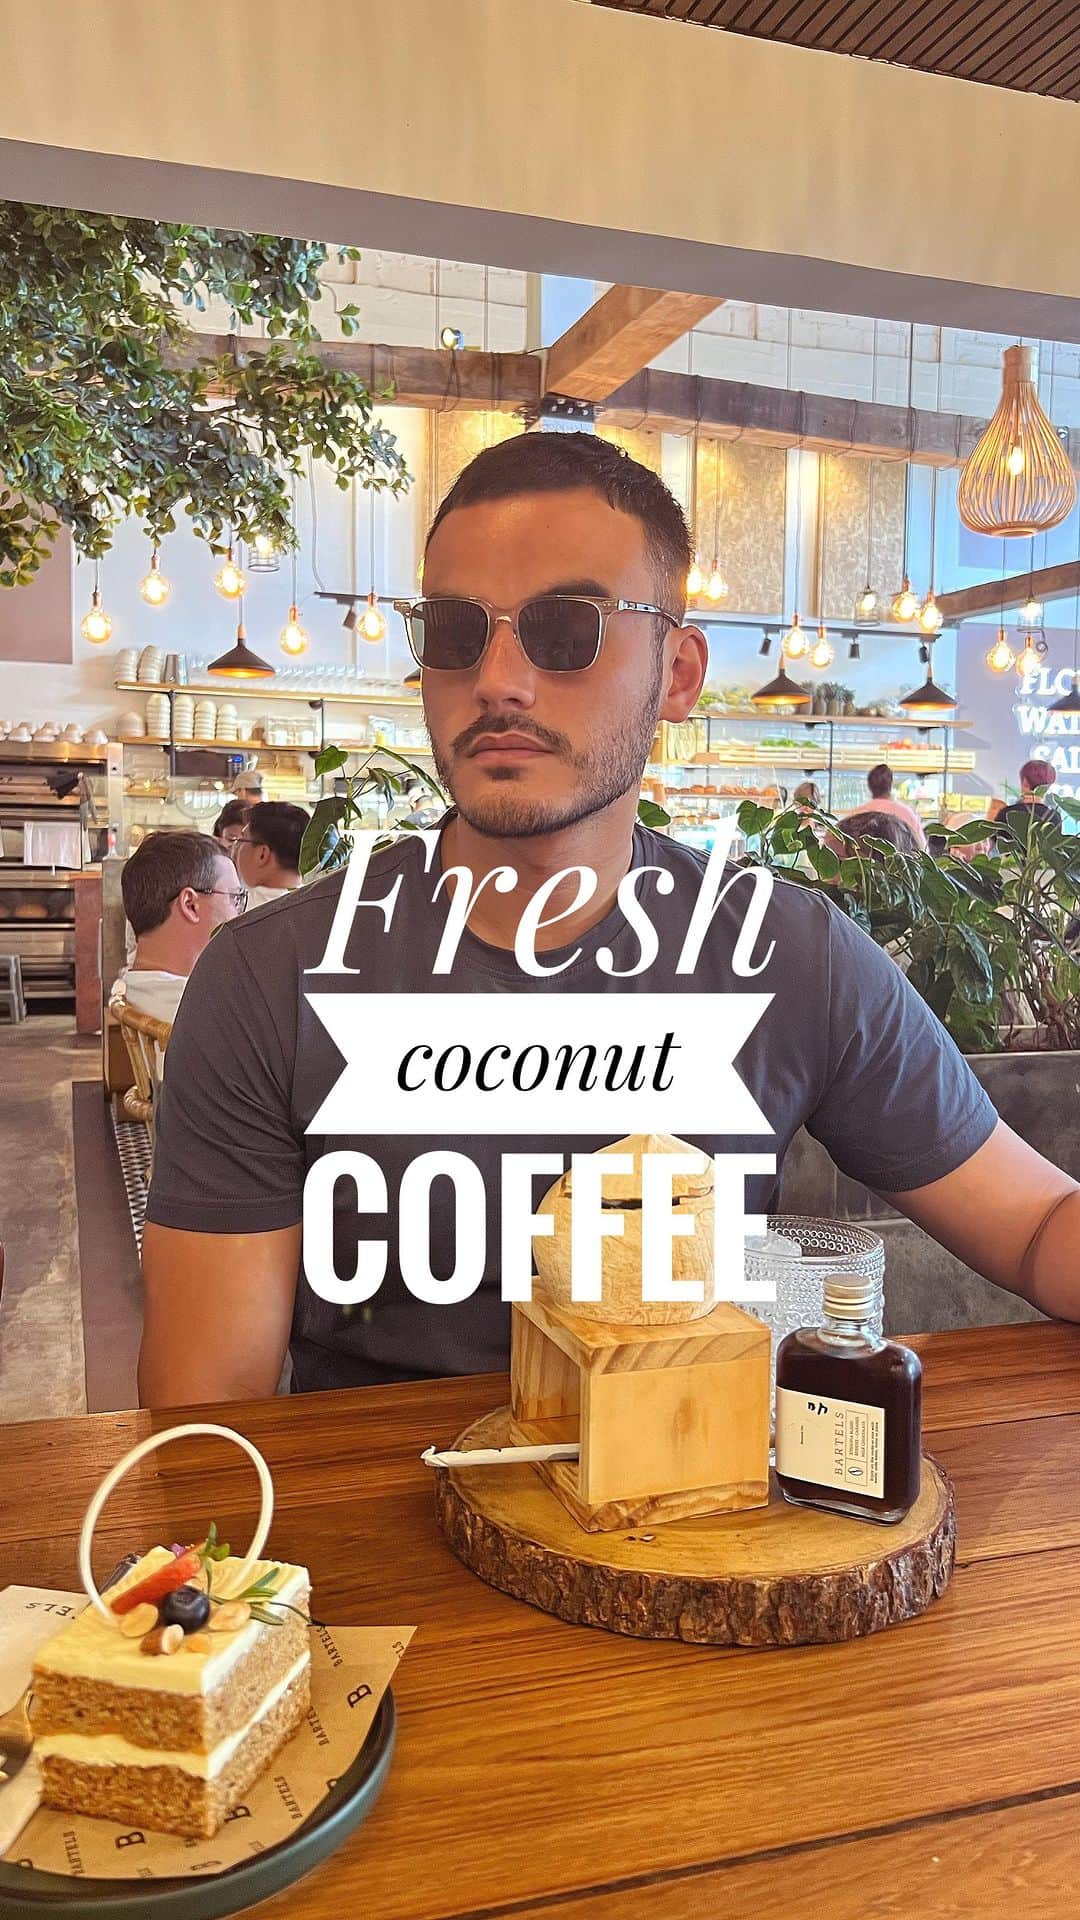 Kam Wai Suenのインスタグラム：「Tag your coffee and coconut lover friends 📍☕️🥥  Sip on a taste of the tropics with Bartel’s coconut-coffee, perfectly blended for a refreshing start to your day in Phuket. @bartels.thailand   #coconut #coffee #coconutcoffee #coffeeholic #coffeeshop #cafe #phuket #wheninphuket #wheninthailand #hkreel #hkfoodie #hktravelblogger」